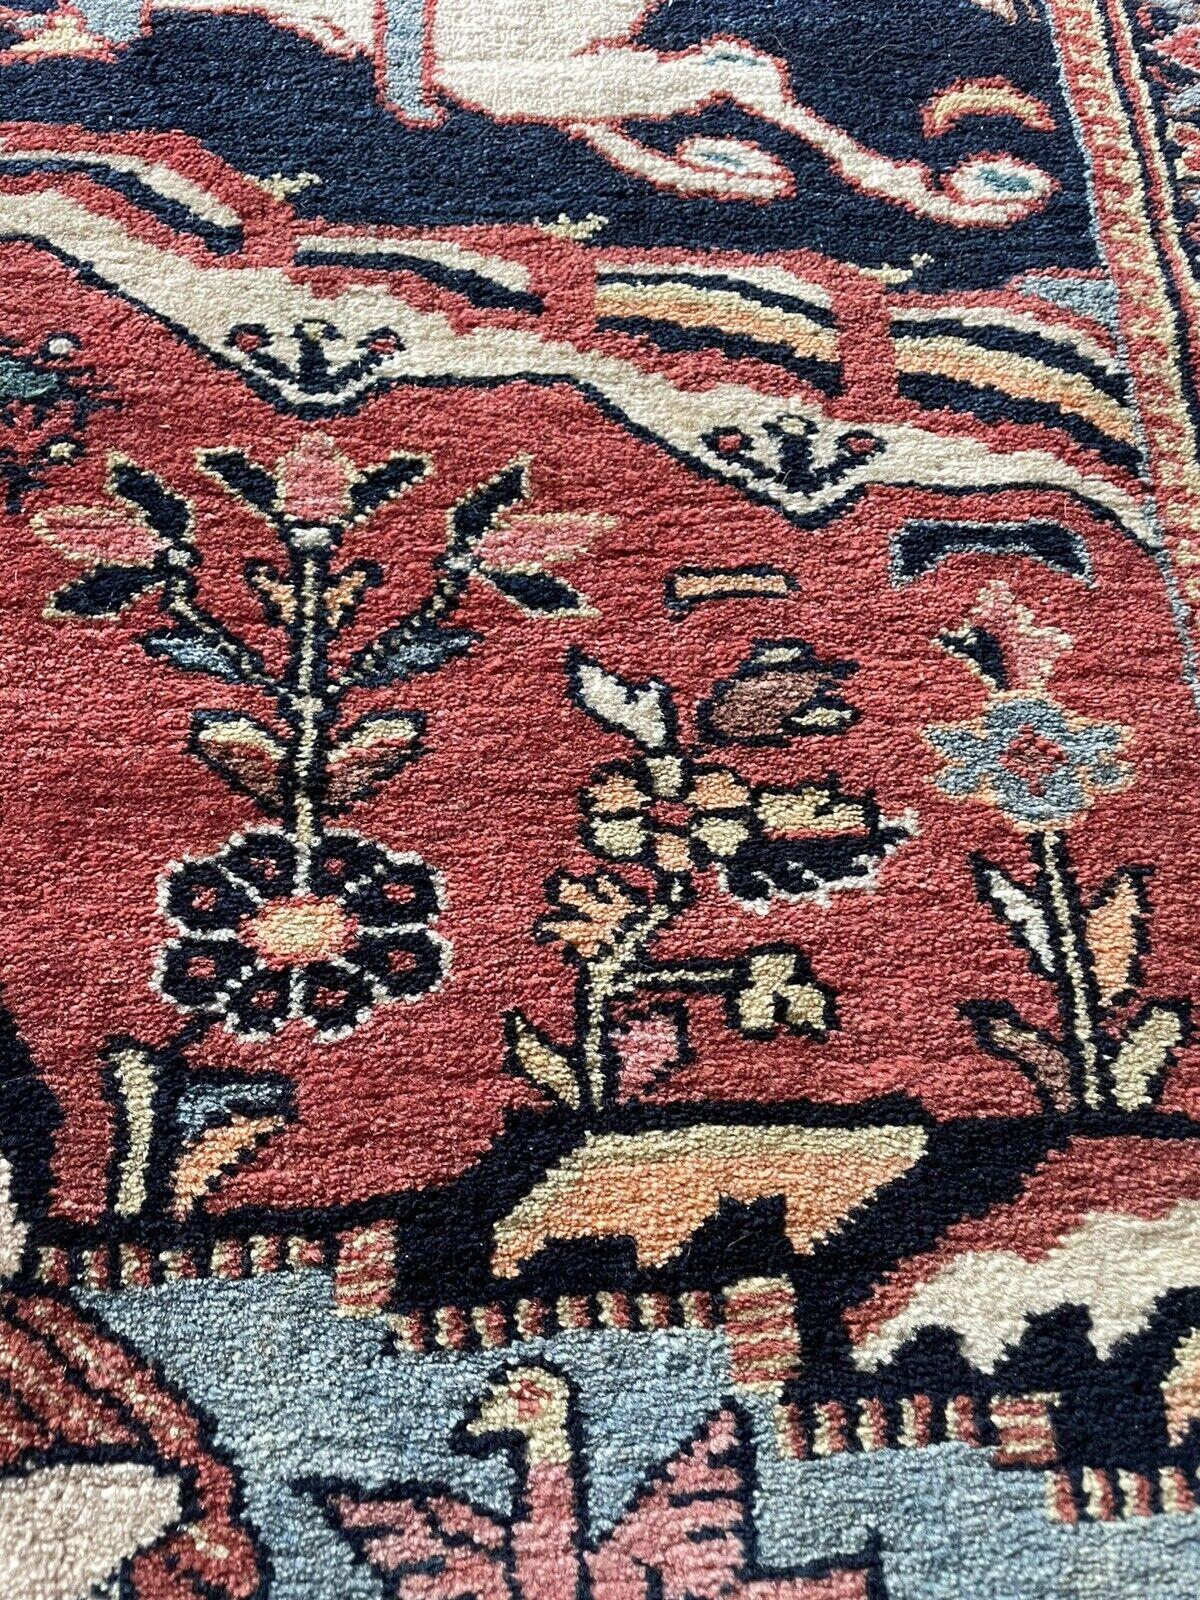 Handmade Antique Persian Style Lilihan Collectible Rug 2.2' x 3.1', 1920s - 1N01 For Sale 3